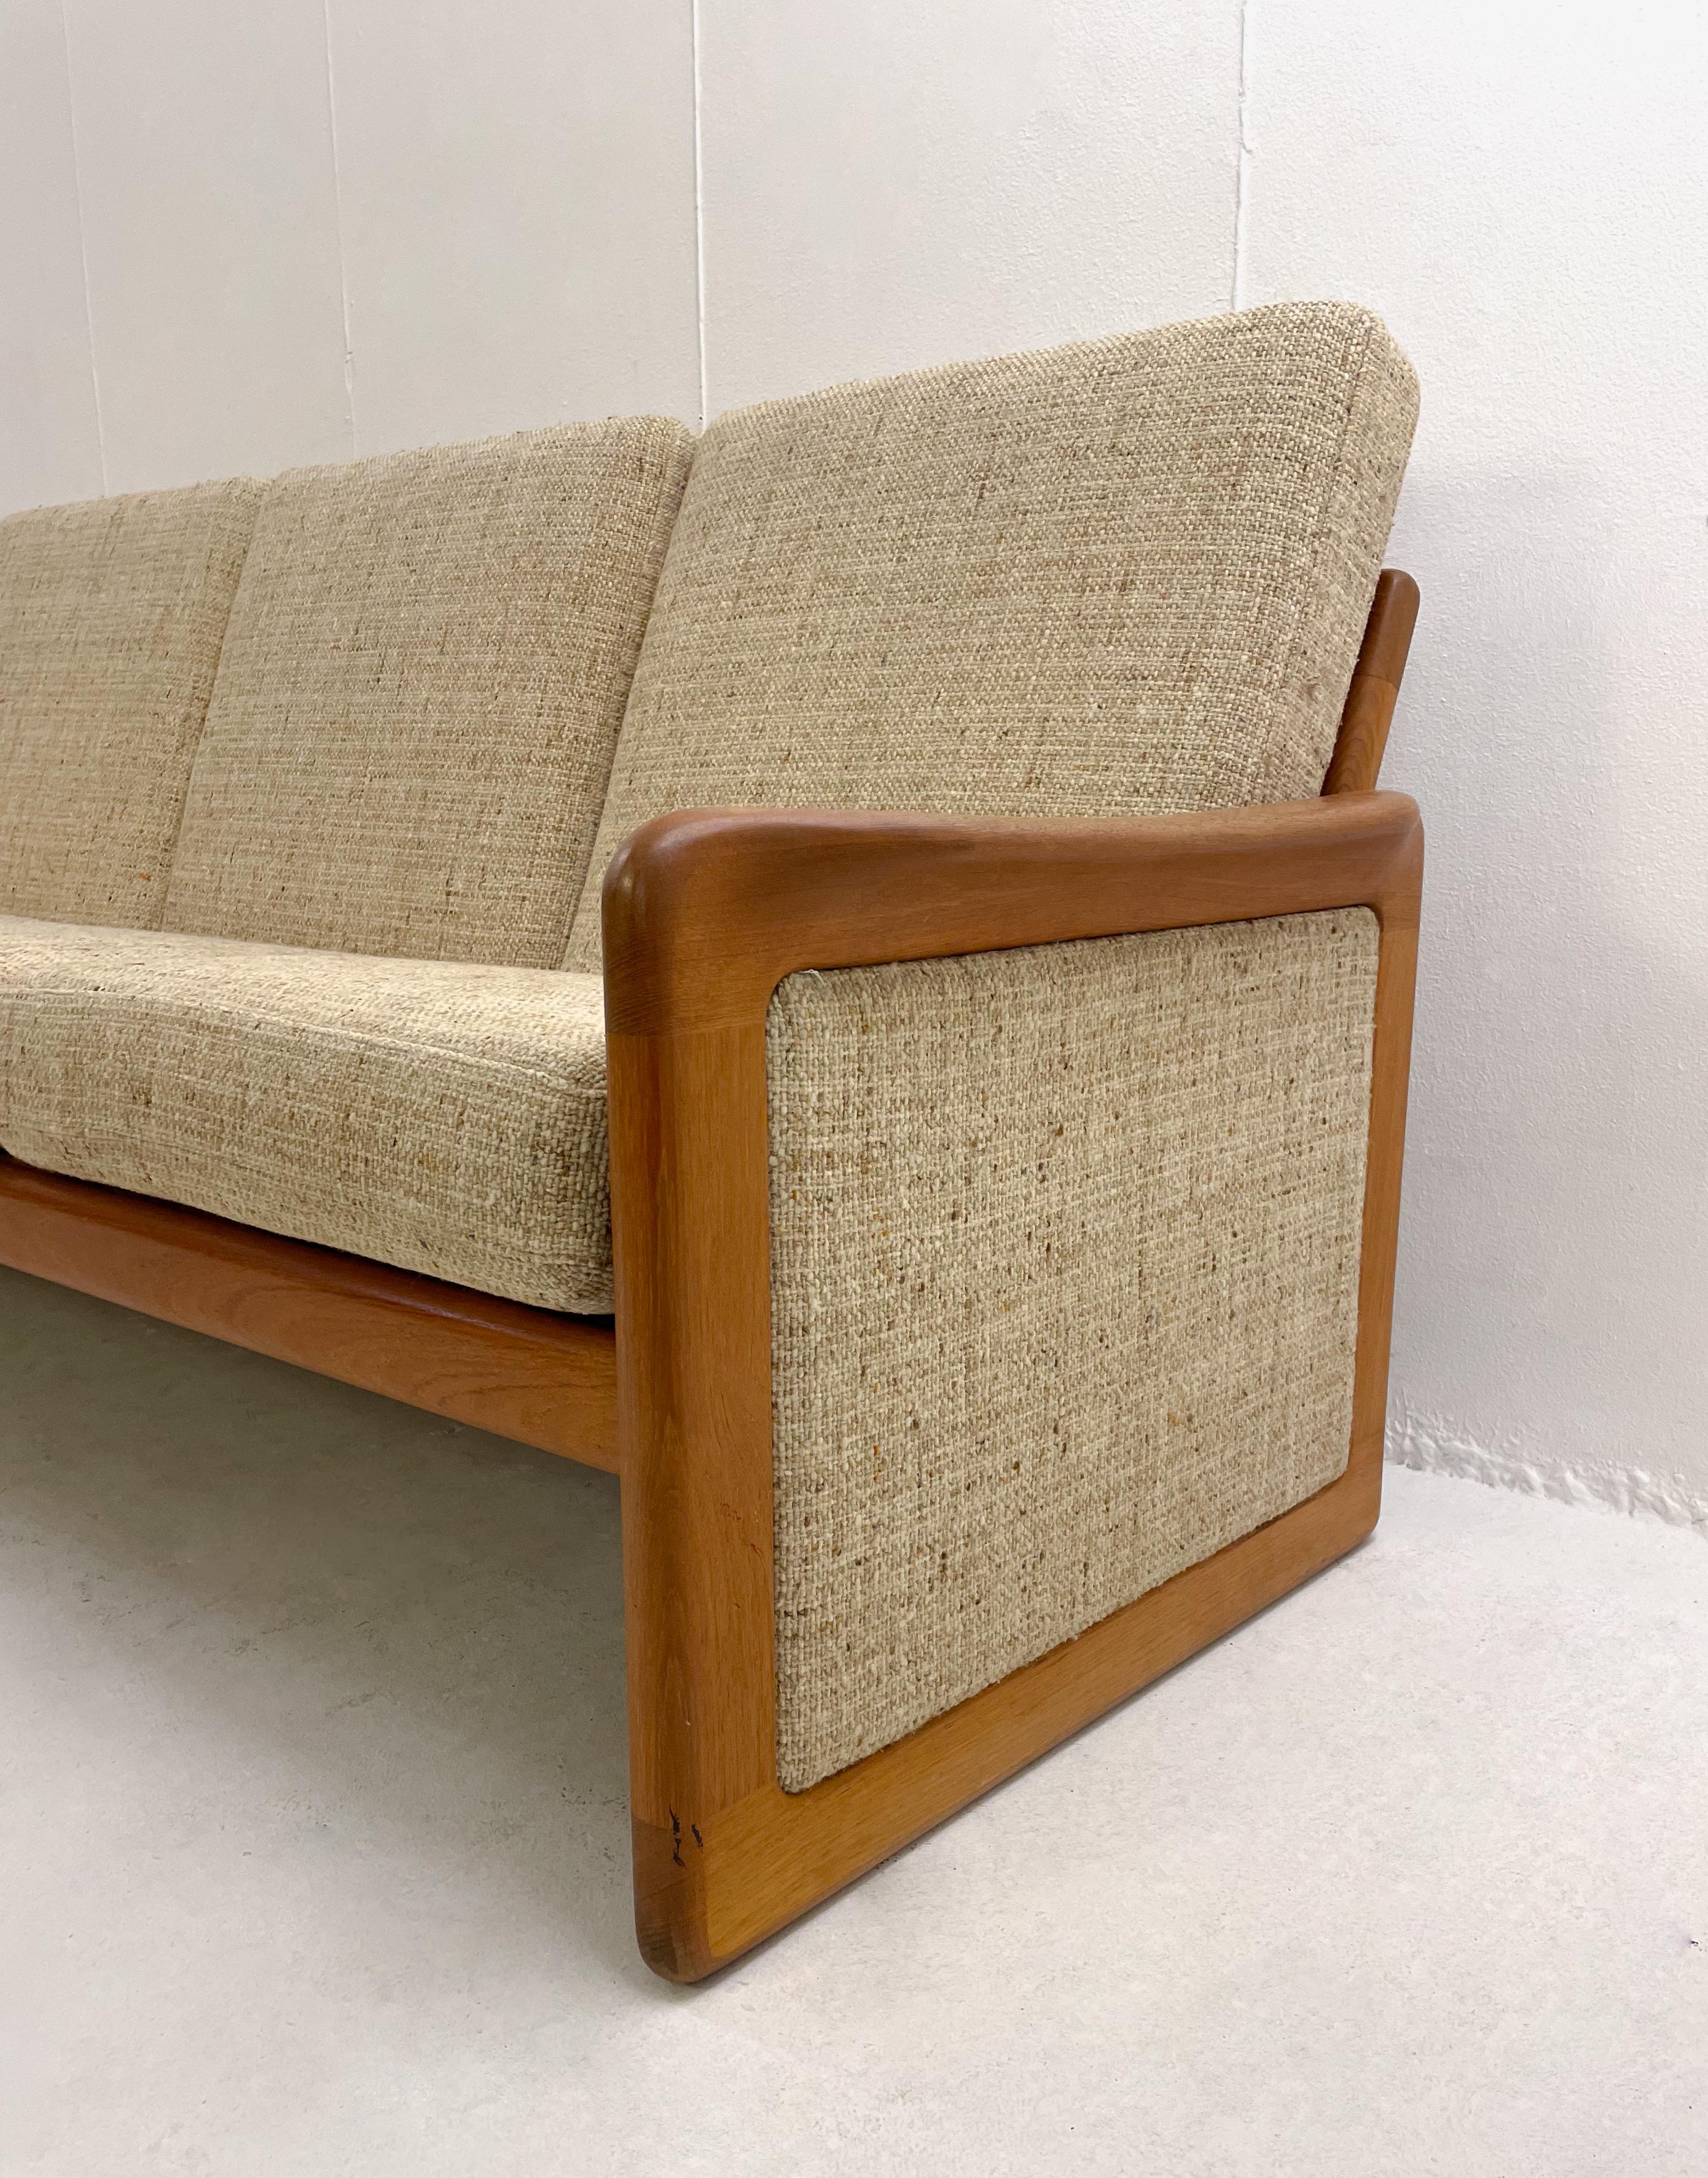 Mid-Century Teck and Beige Wool Cushions Sofa by Dyrlund, 1960s For Sale 2